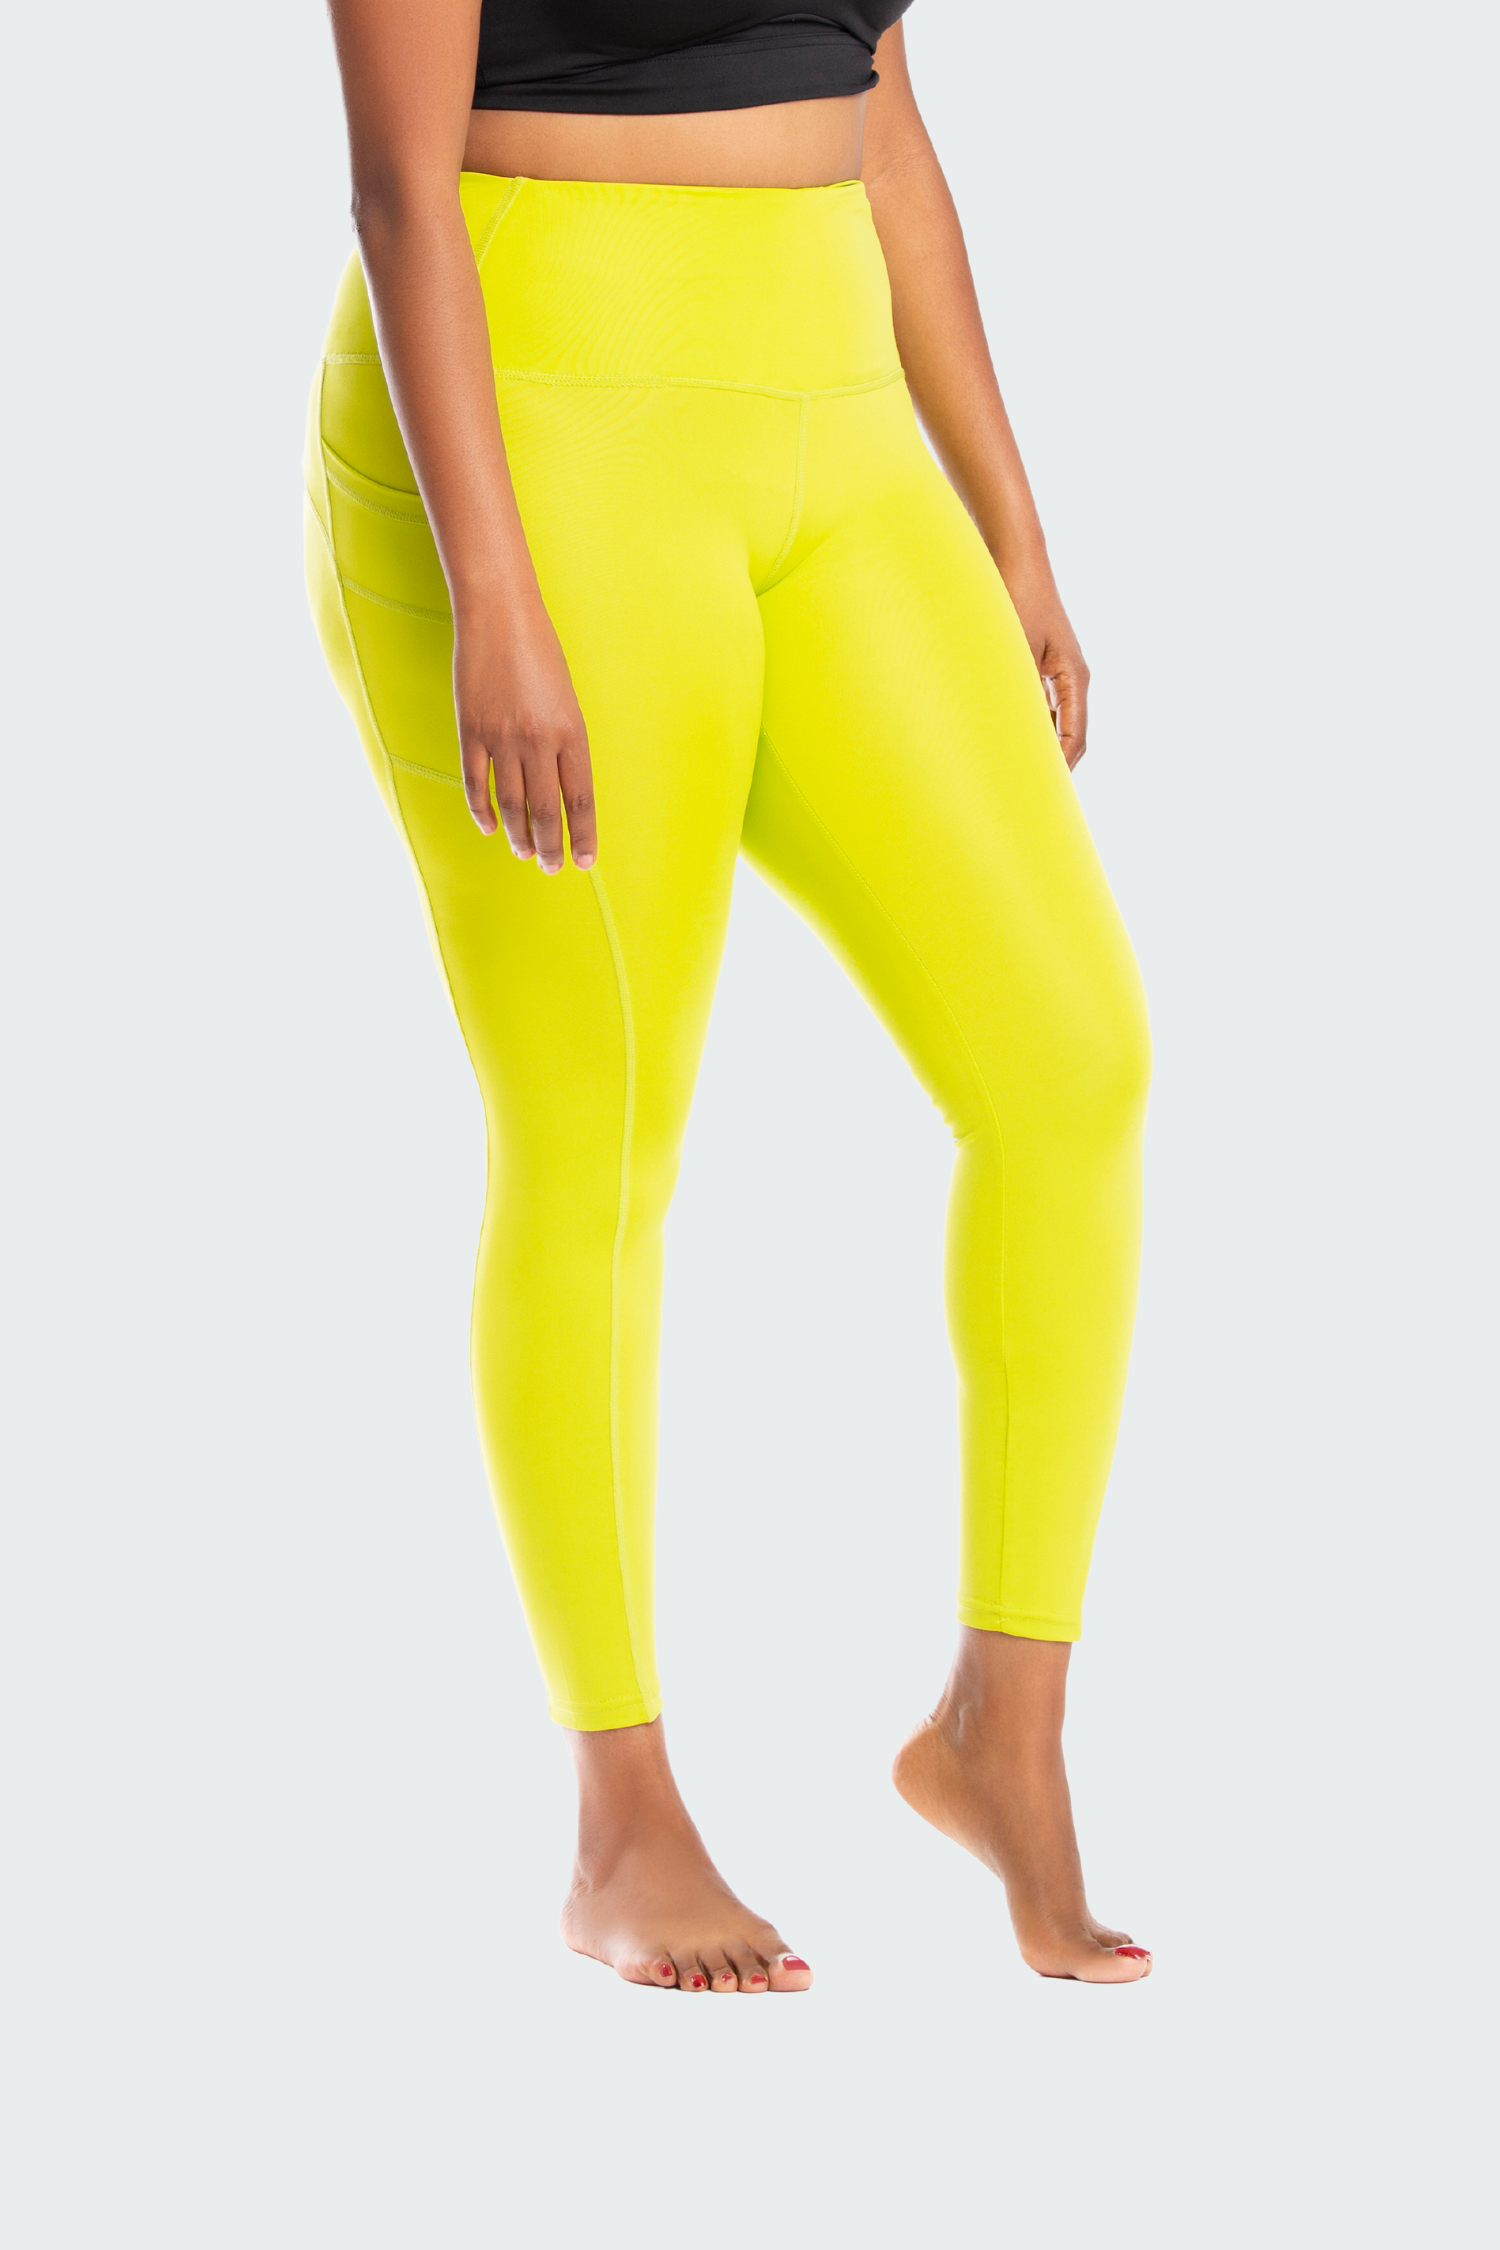 🌻AERIE Play Pocket Neon Yellow High Waisted Leggings Size Large